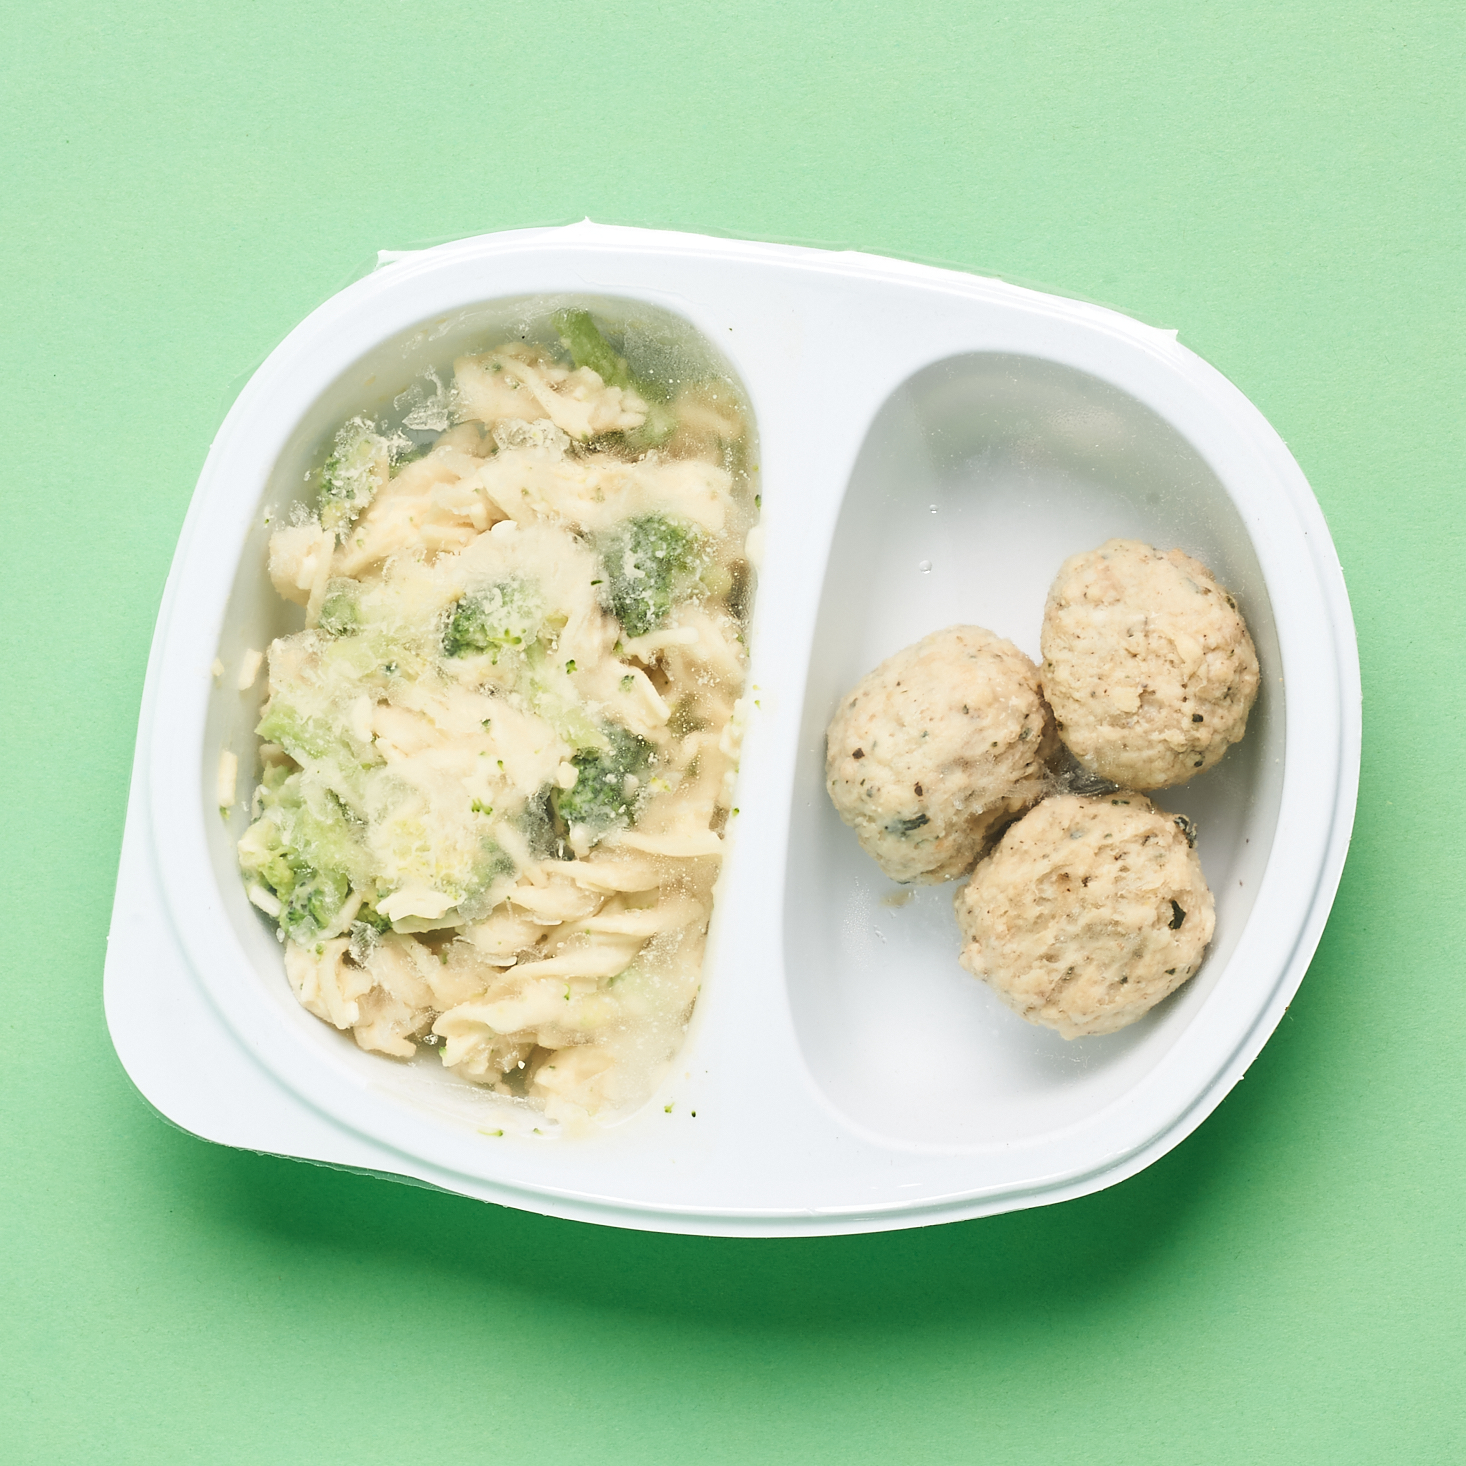 Yumble Subscription chicken meatballs and gluten-free mac with broccoli